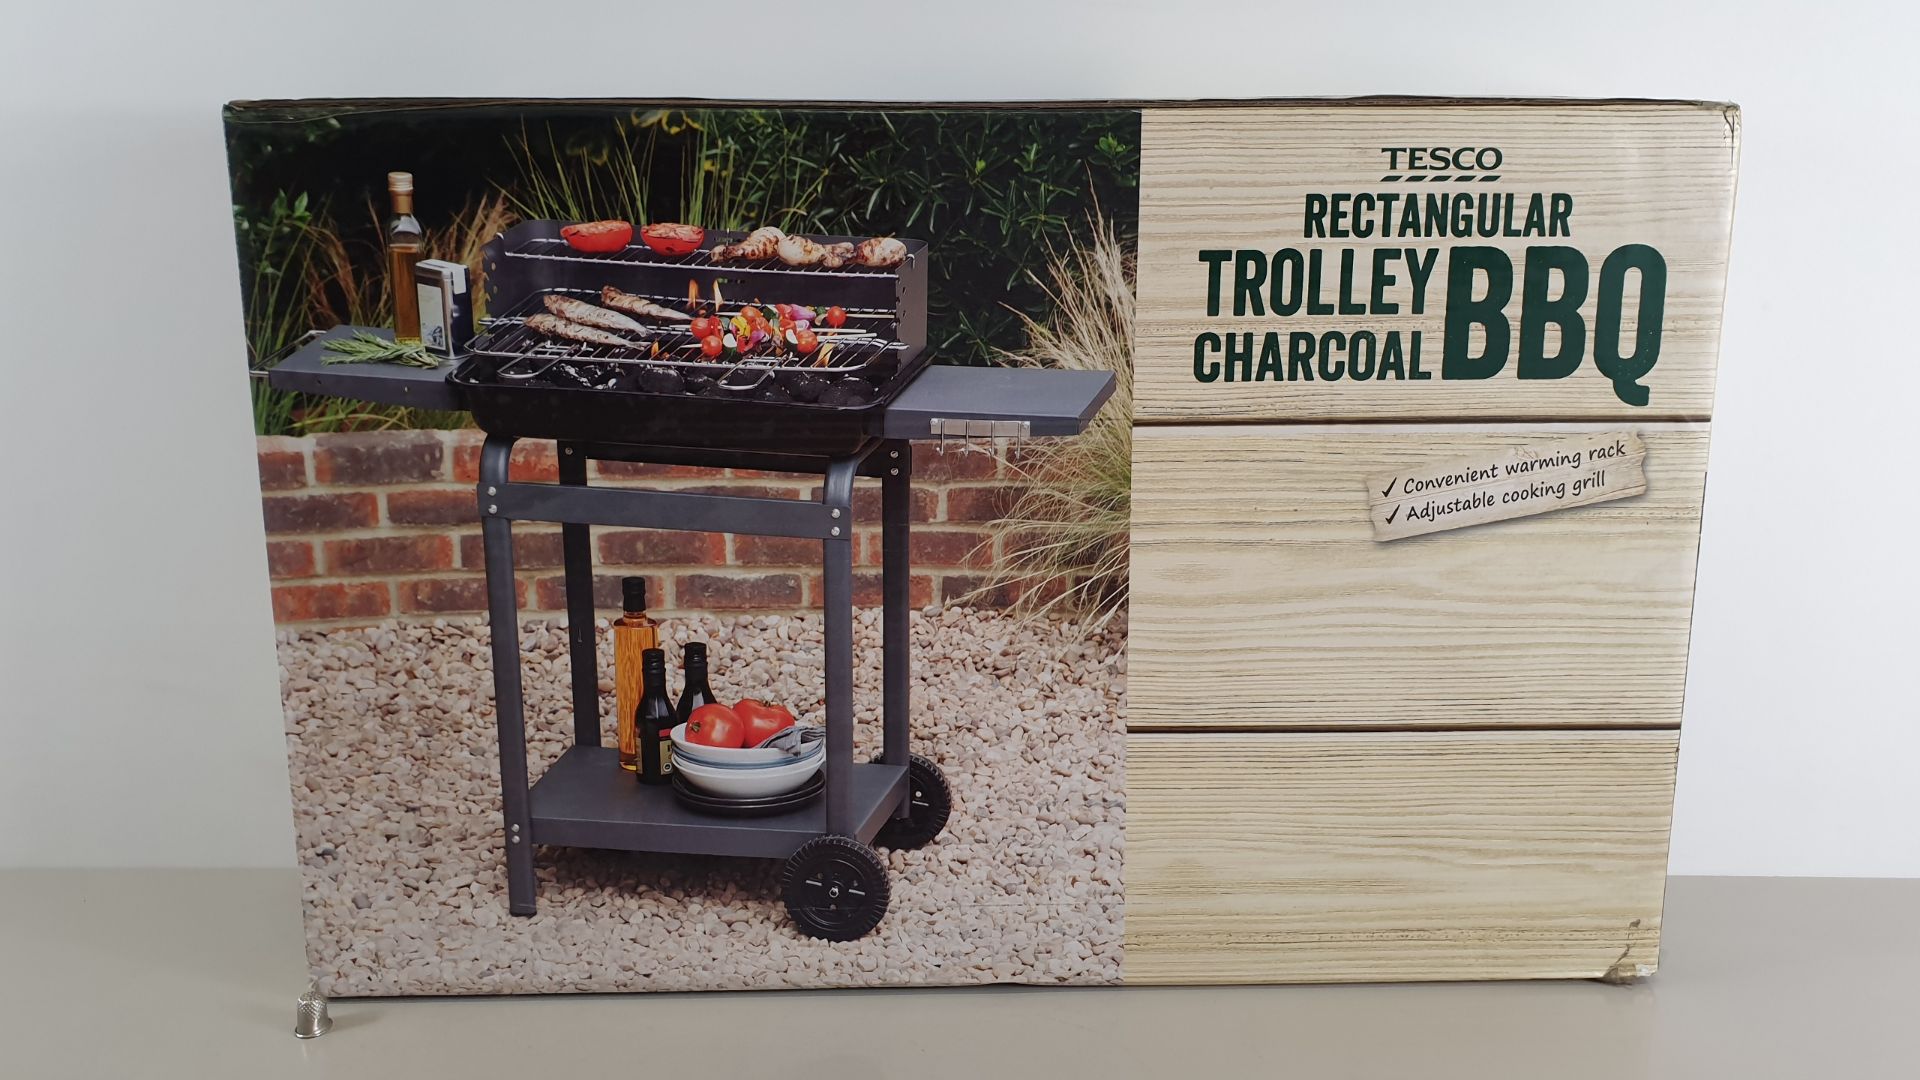 4 X BRAND NEW BOXED RECTANGULAR TROLLEY CHARCOAL BBQ